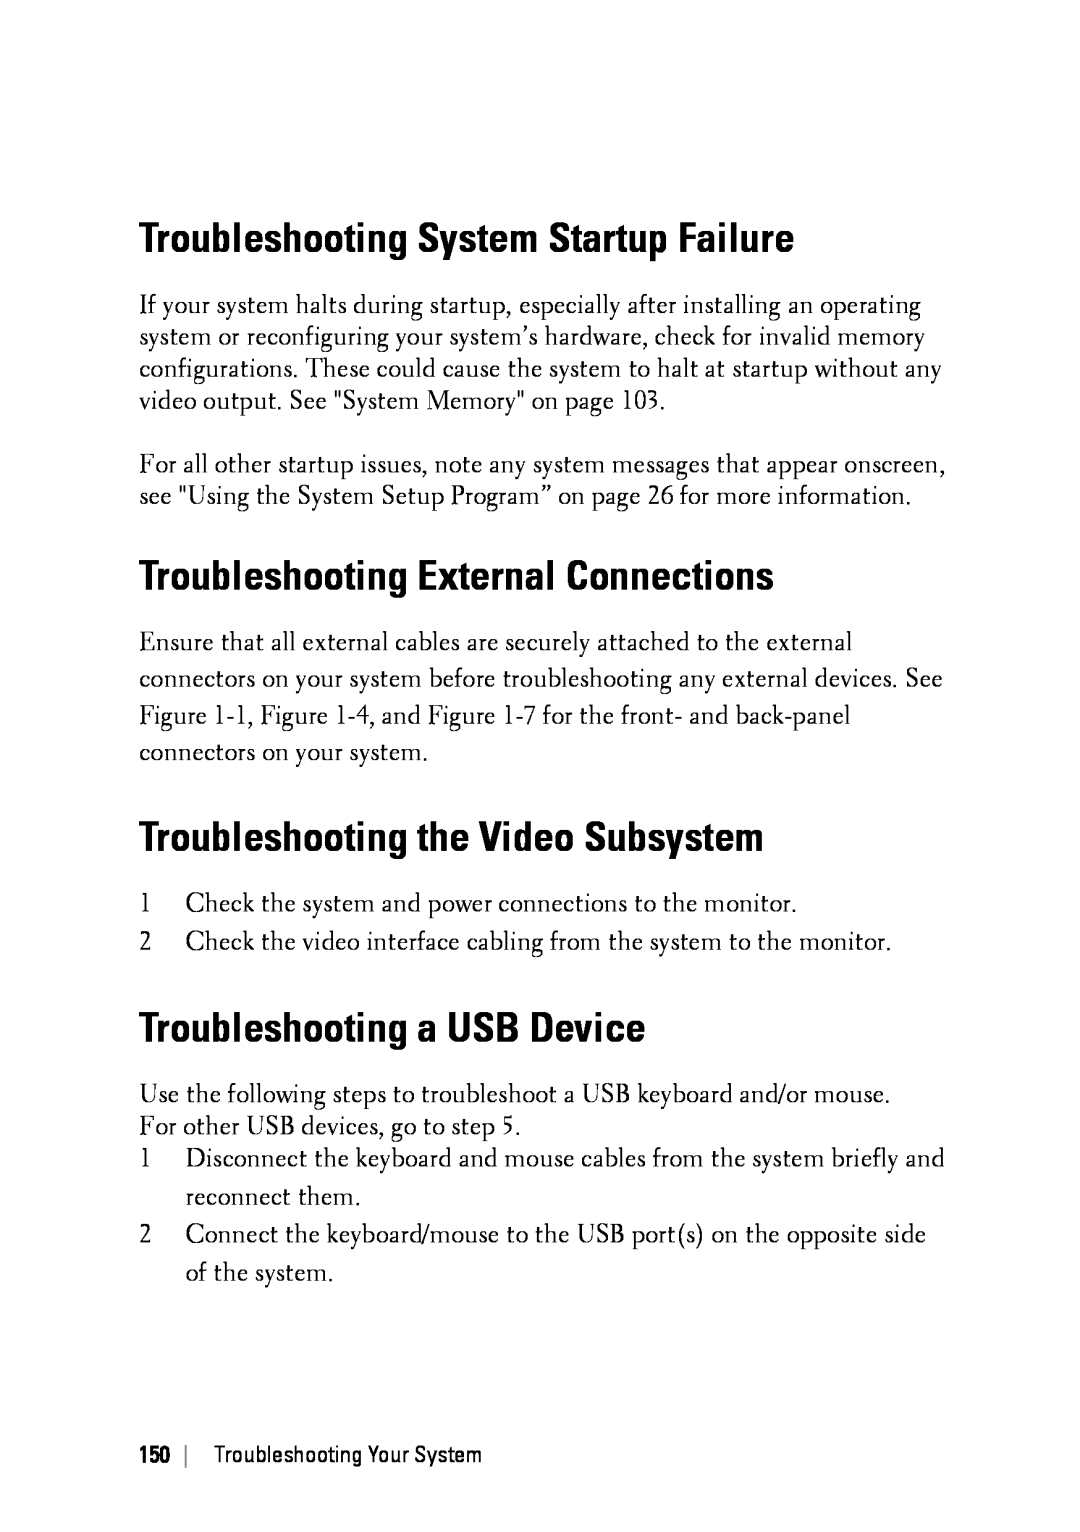 Dell C6145 Troubleshooting System Startup Failure, Troubleshooting External Connections, Troubleshooting a USB Device 